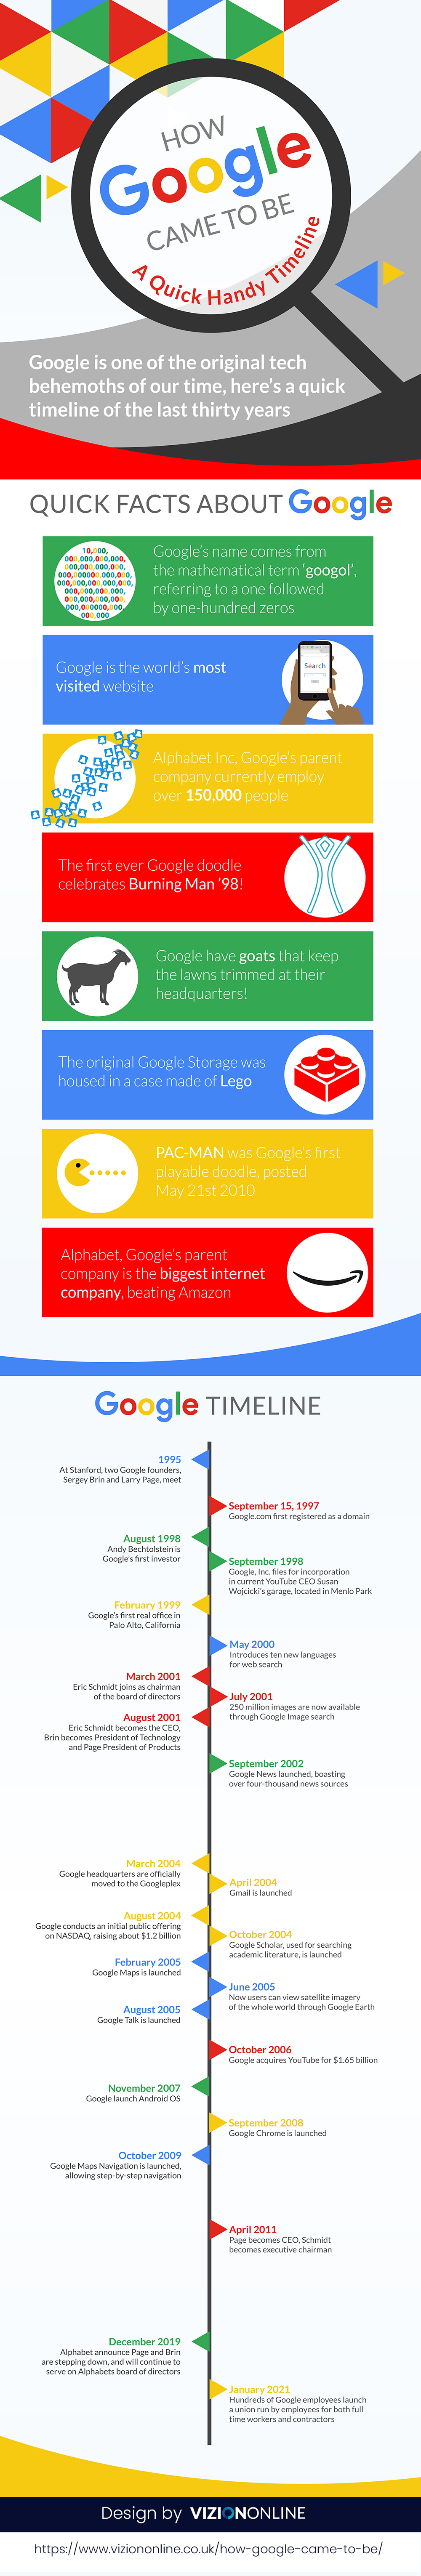 How Google Came To Be - A Timeline